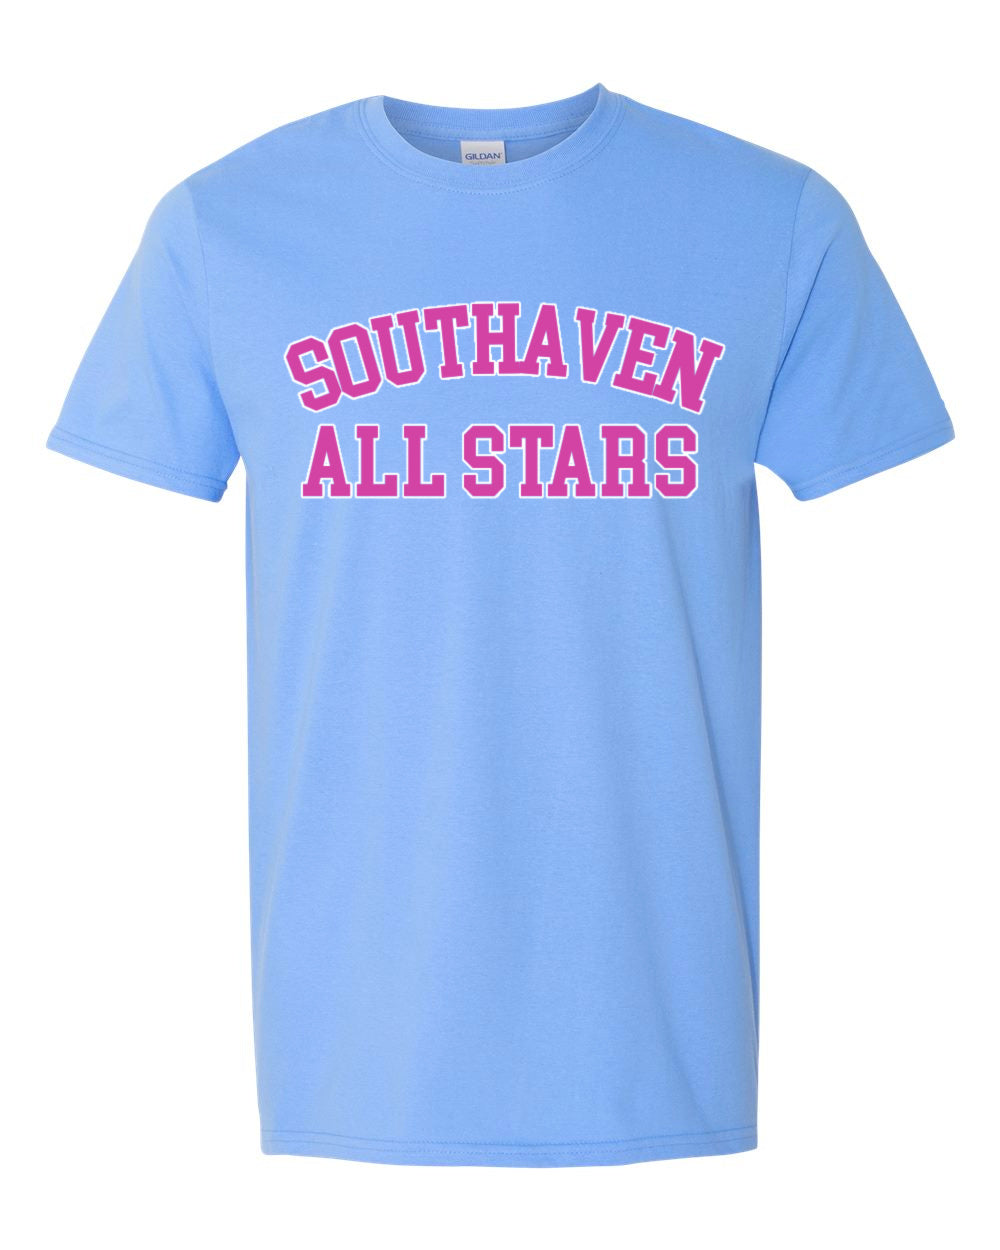 Southaven All Stars Soft Style Tee / Toddler, Youth, and Adult Sizes/ Block Font